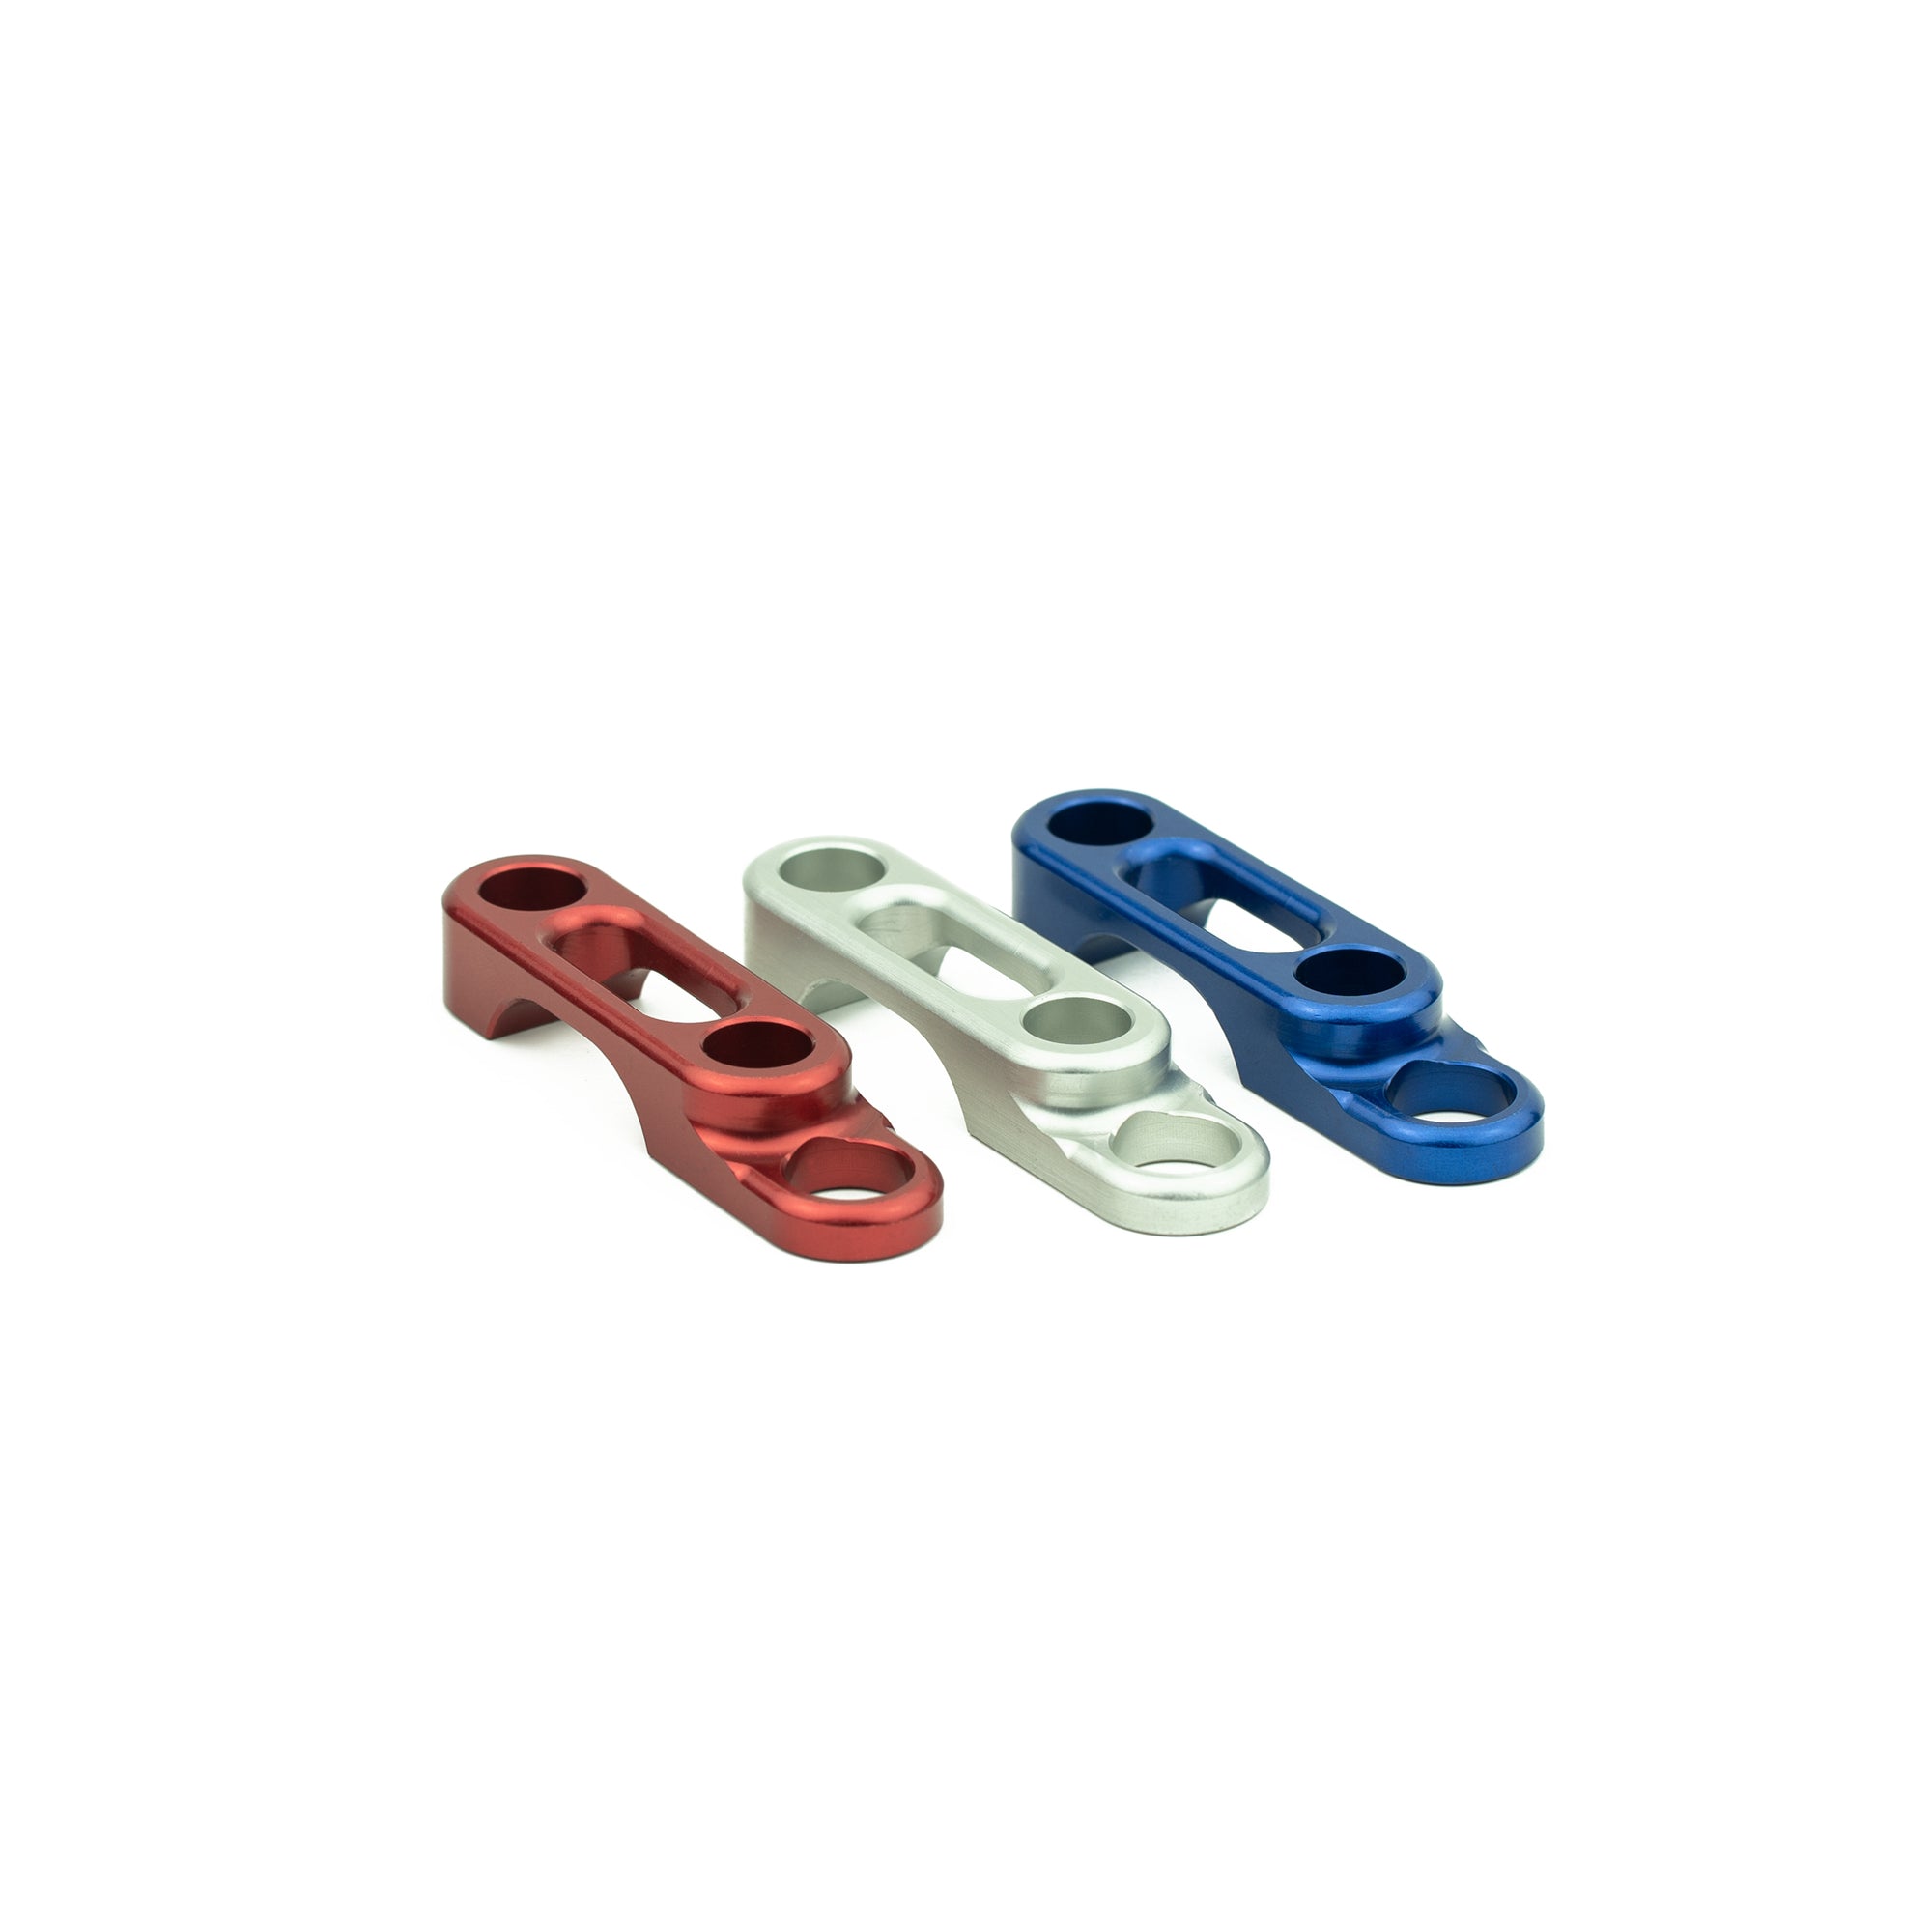 Hook keeper clamps used for rigging or attaching a leash to a fishing reel. 